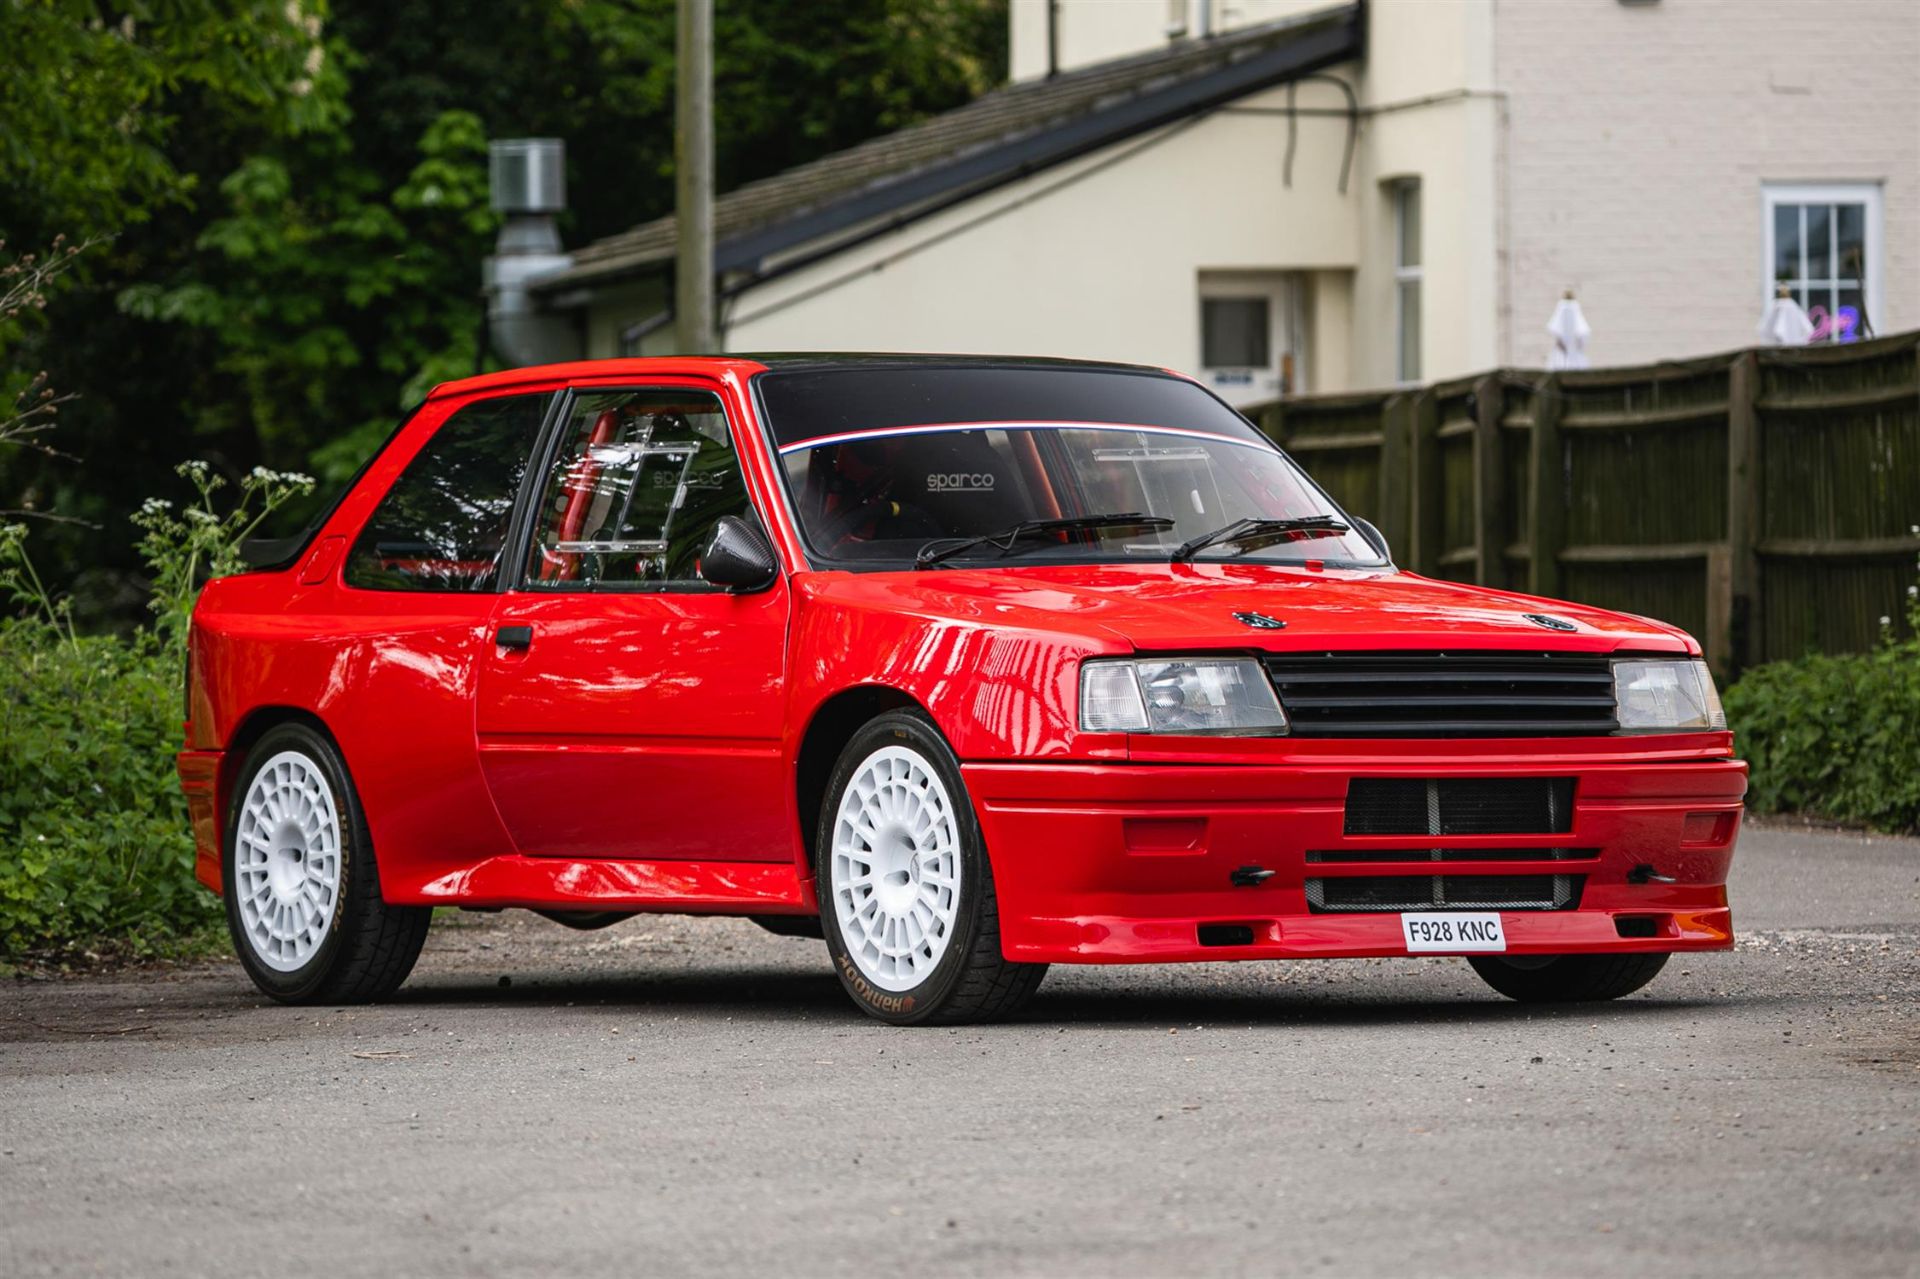 1988 Peugeot 309 GTi 16v Supercharged 'Maxi' Rally Special